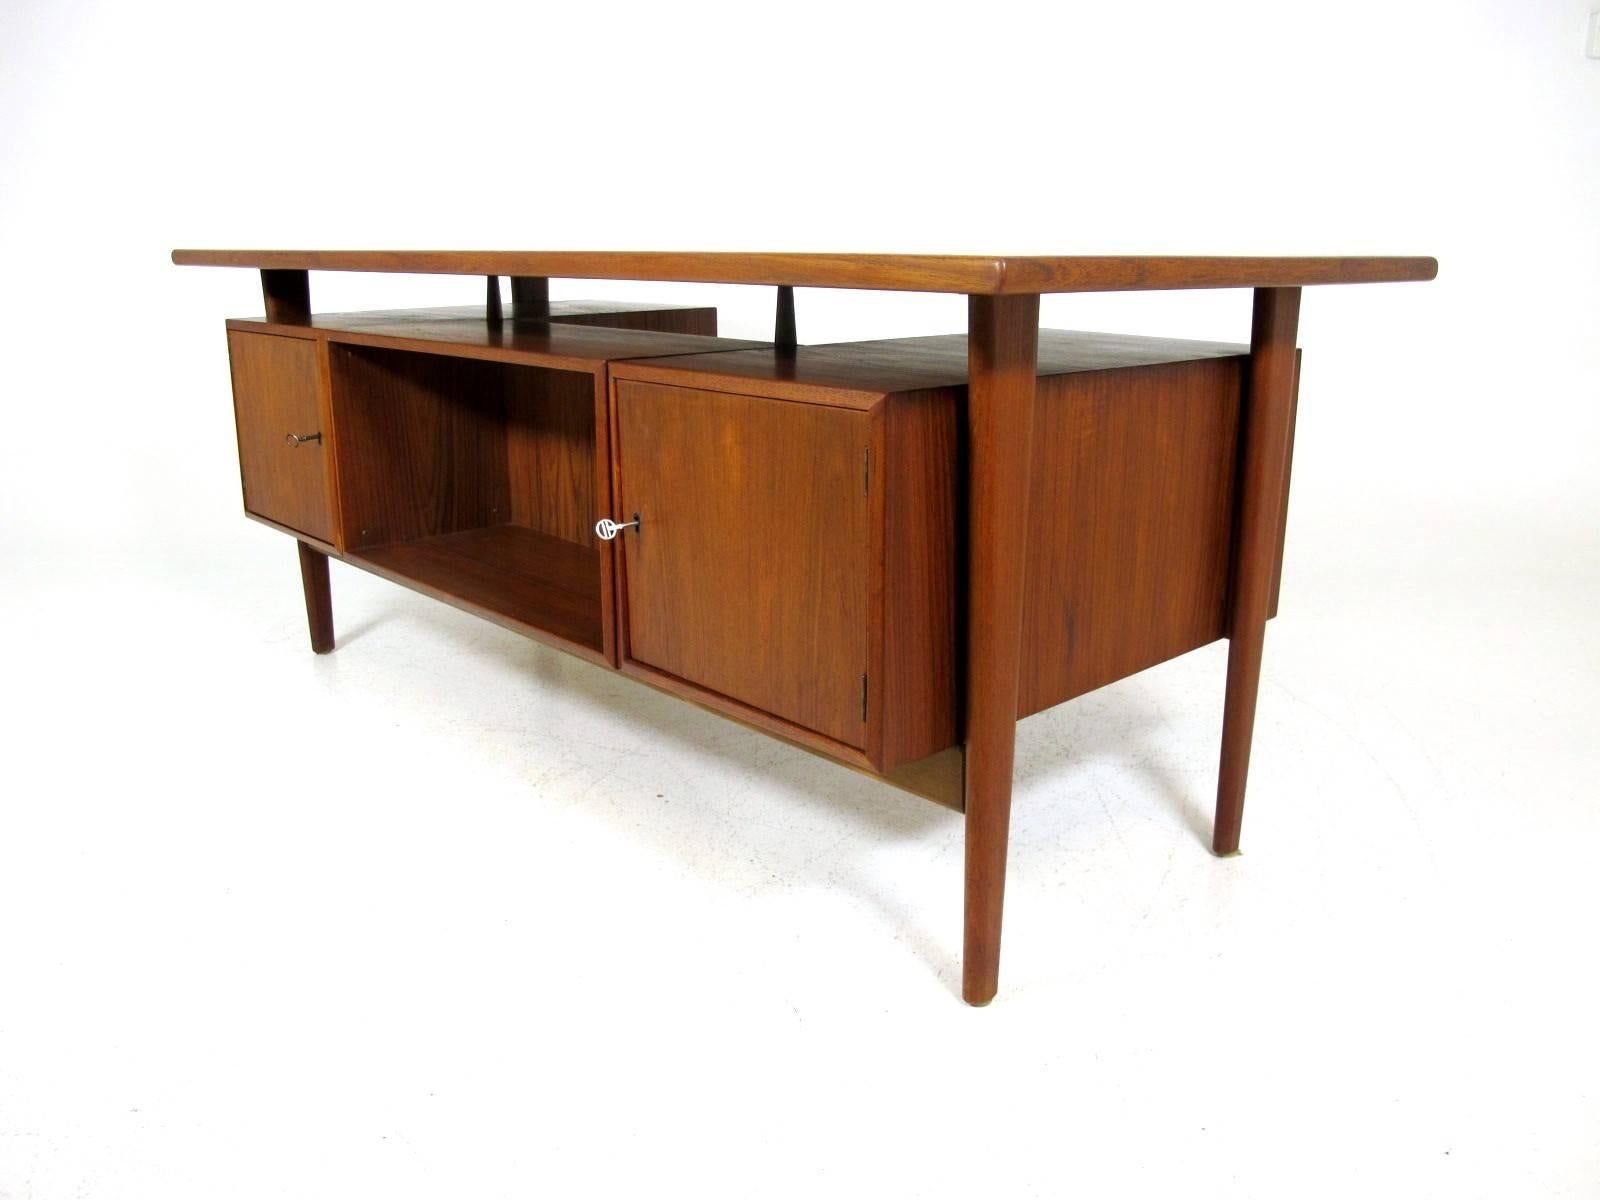 Free Standing Executive Desk with a Floating Top Designed by Kai Kristiansen 1